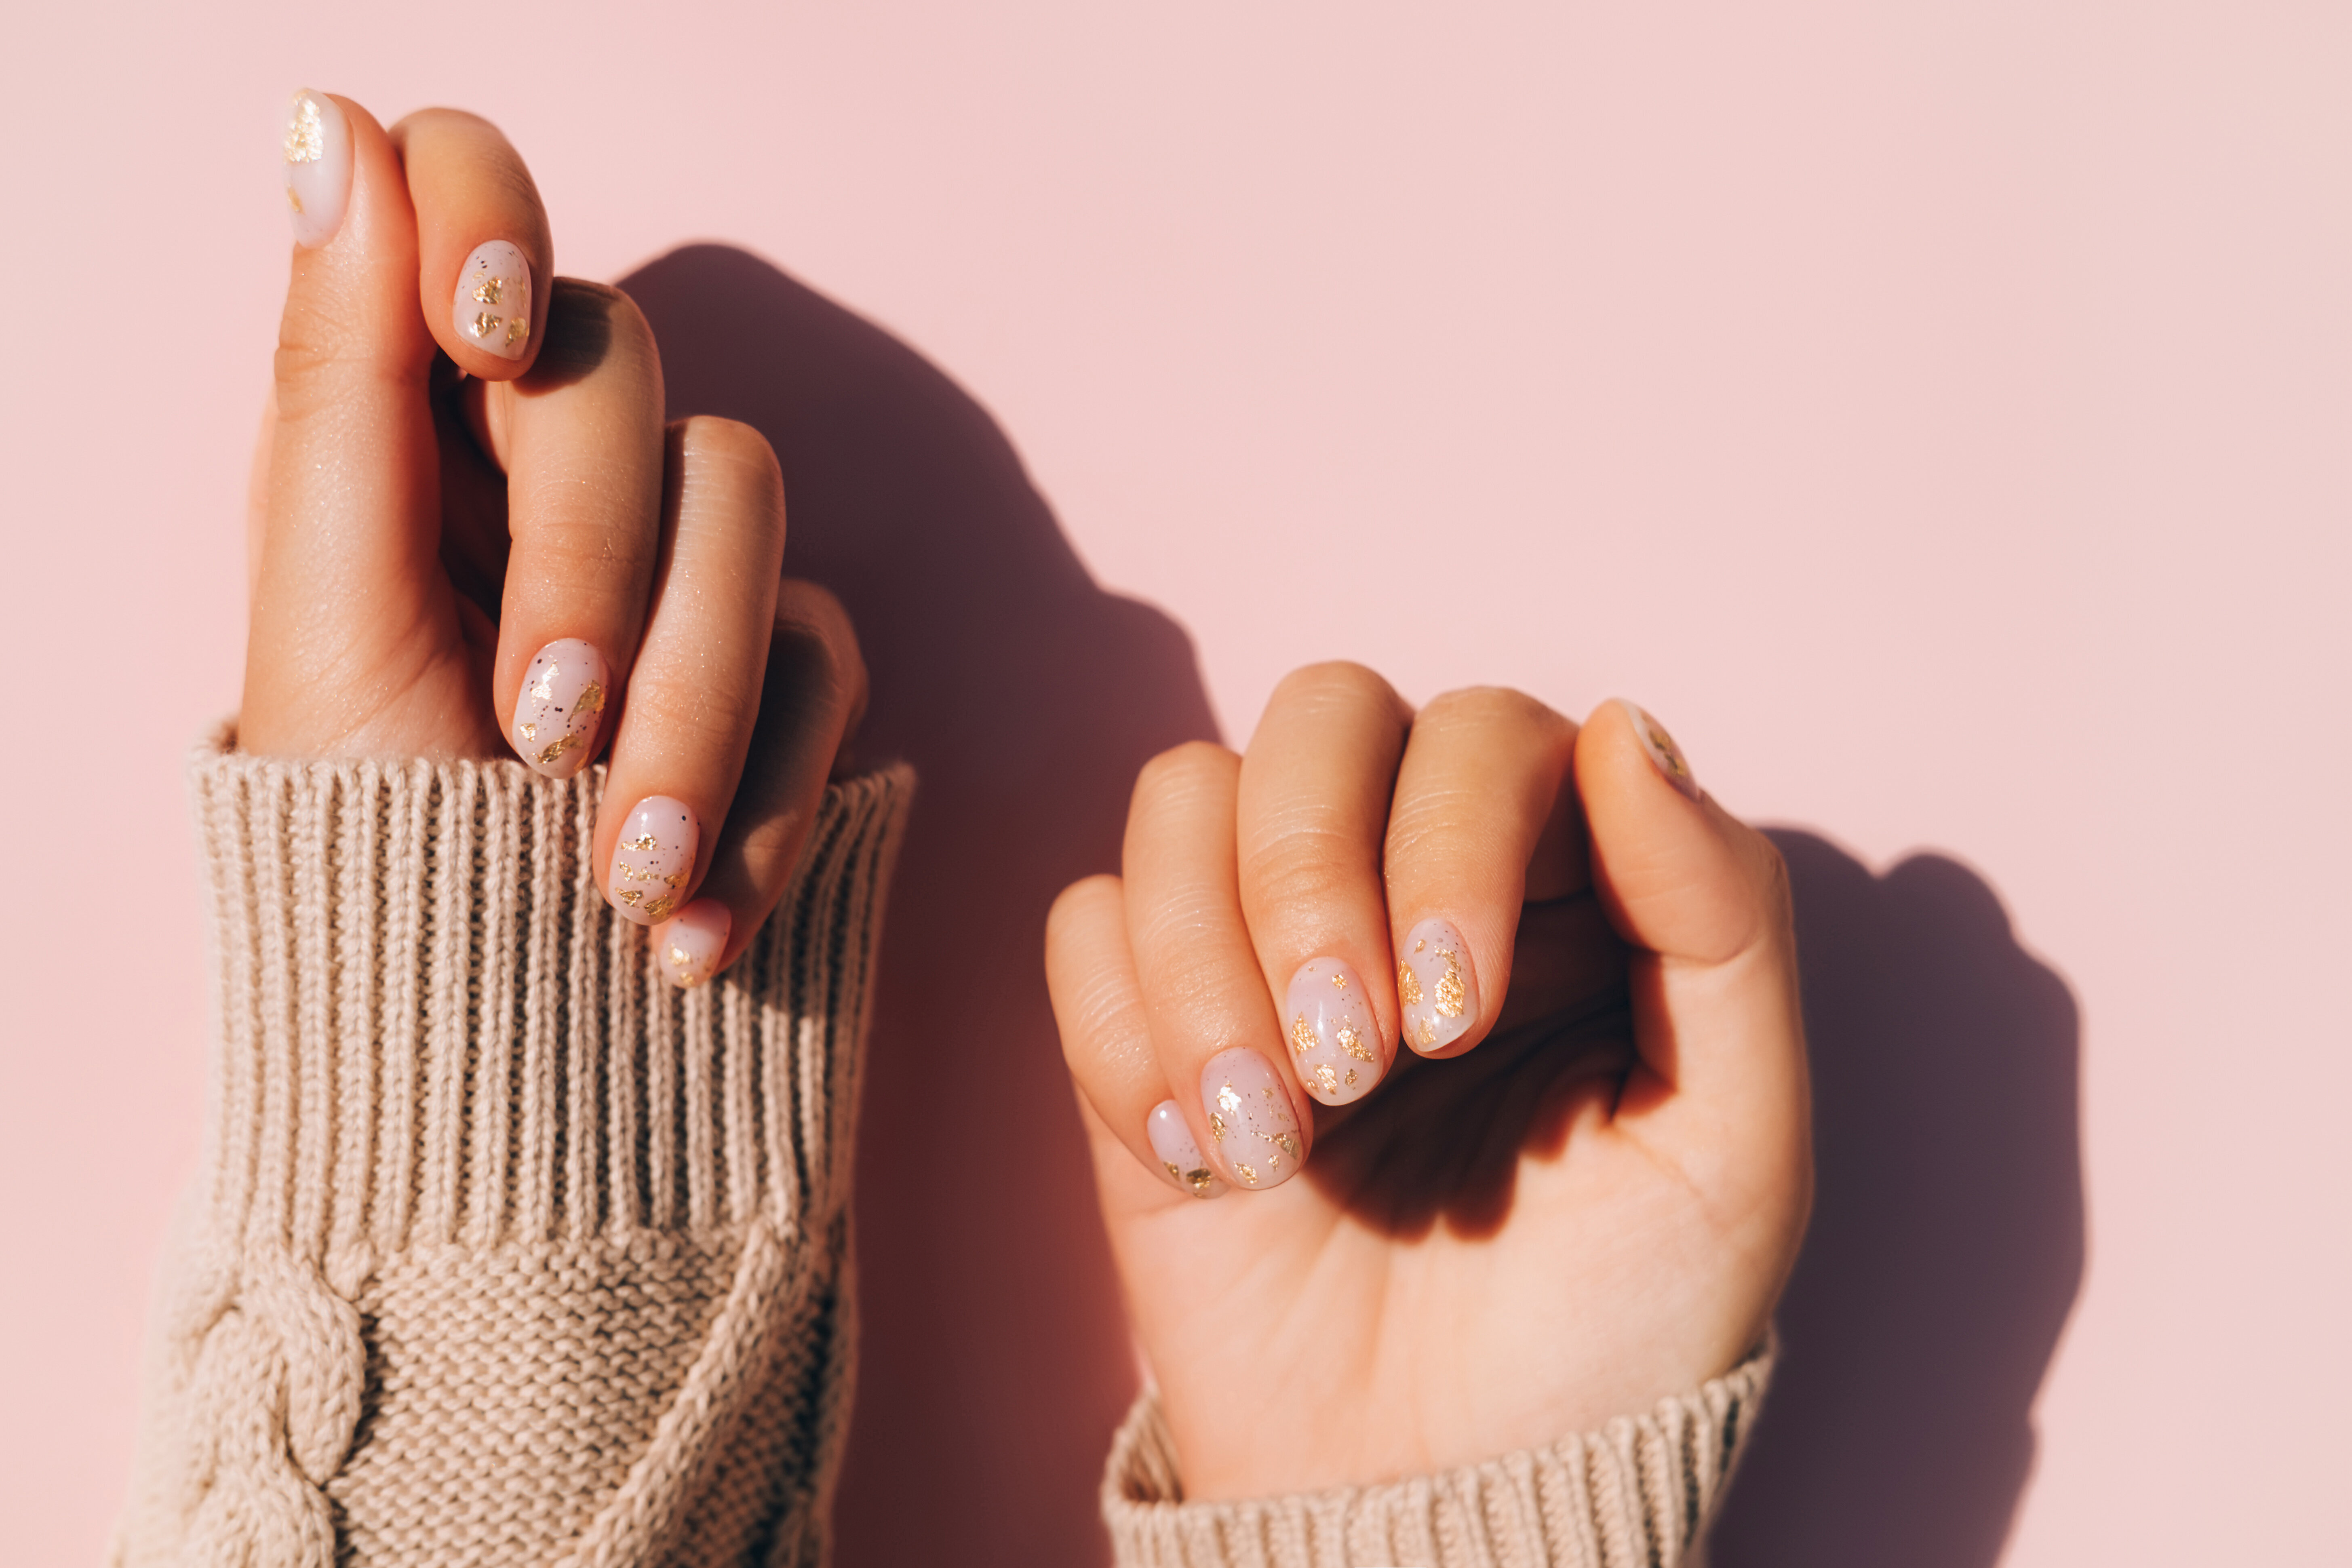 Yellowed nails: What does this mean?